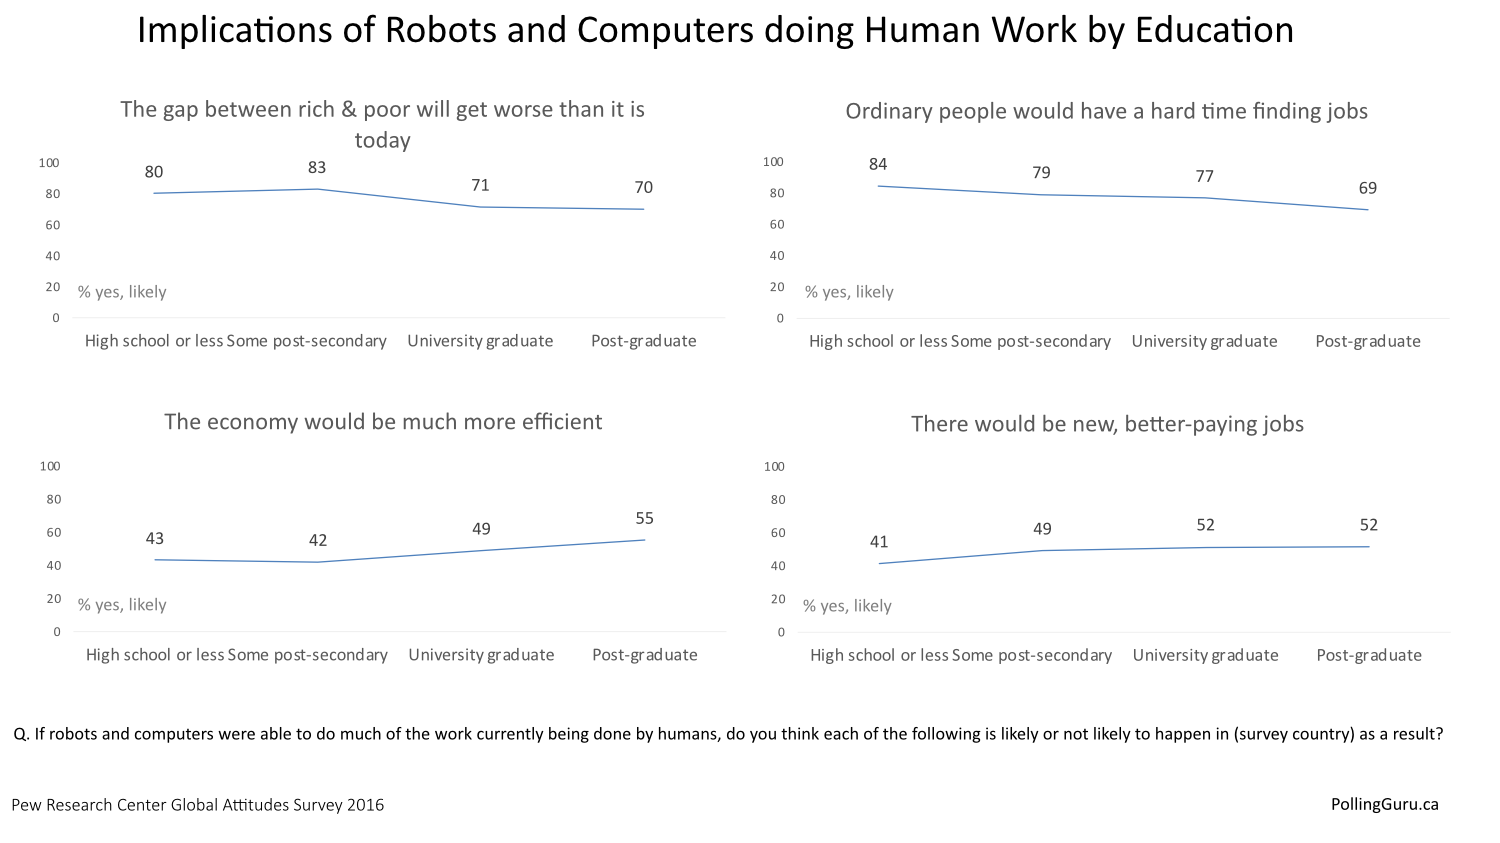 Education is a clear driver of the implications of robots doing human work